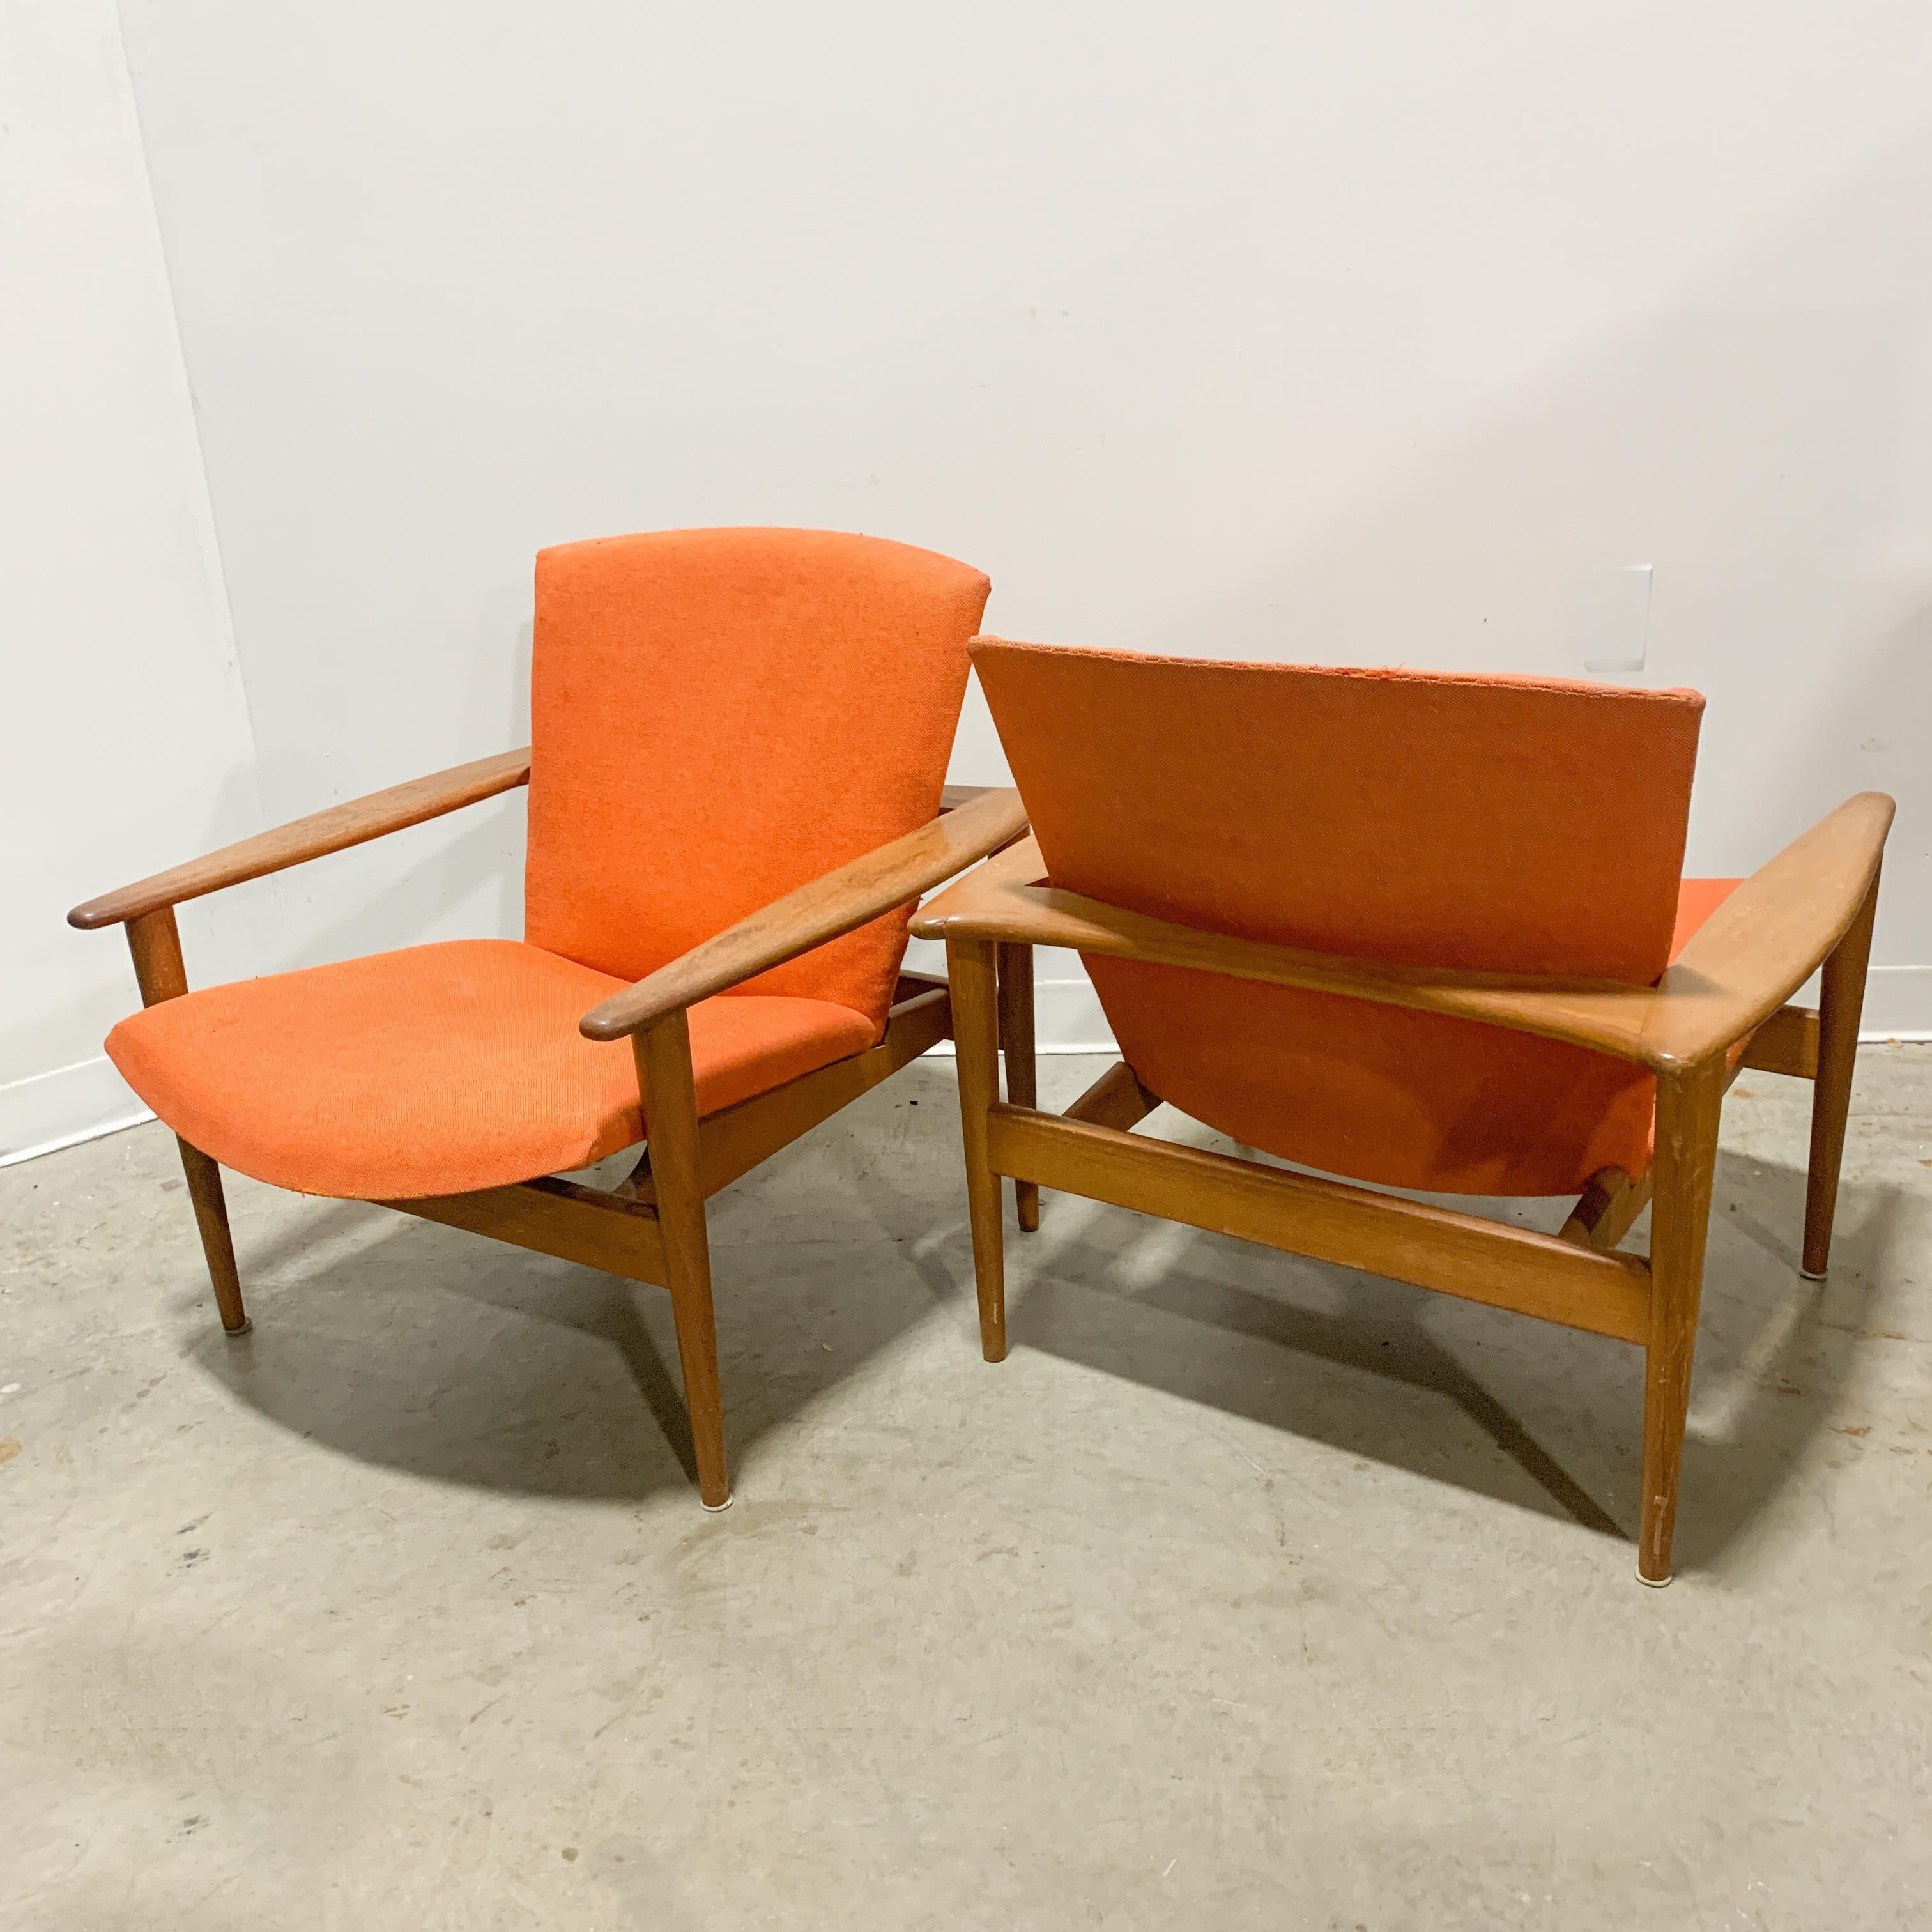 Rare and unusual solid teak lounge chairs probably designed by Arne Hovmand Olsen for Mogens Kold (based on design features, construction details and period image). Fantastic spear arms and a unique wrap-around form. High-quality craftsmanship and